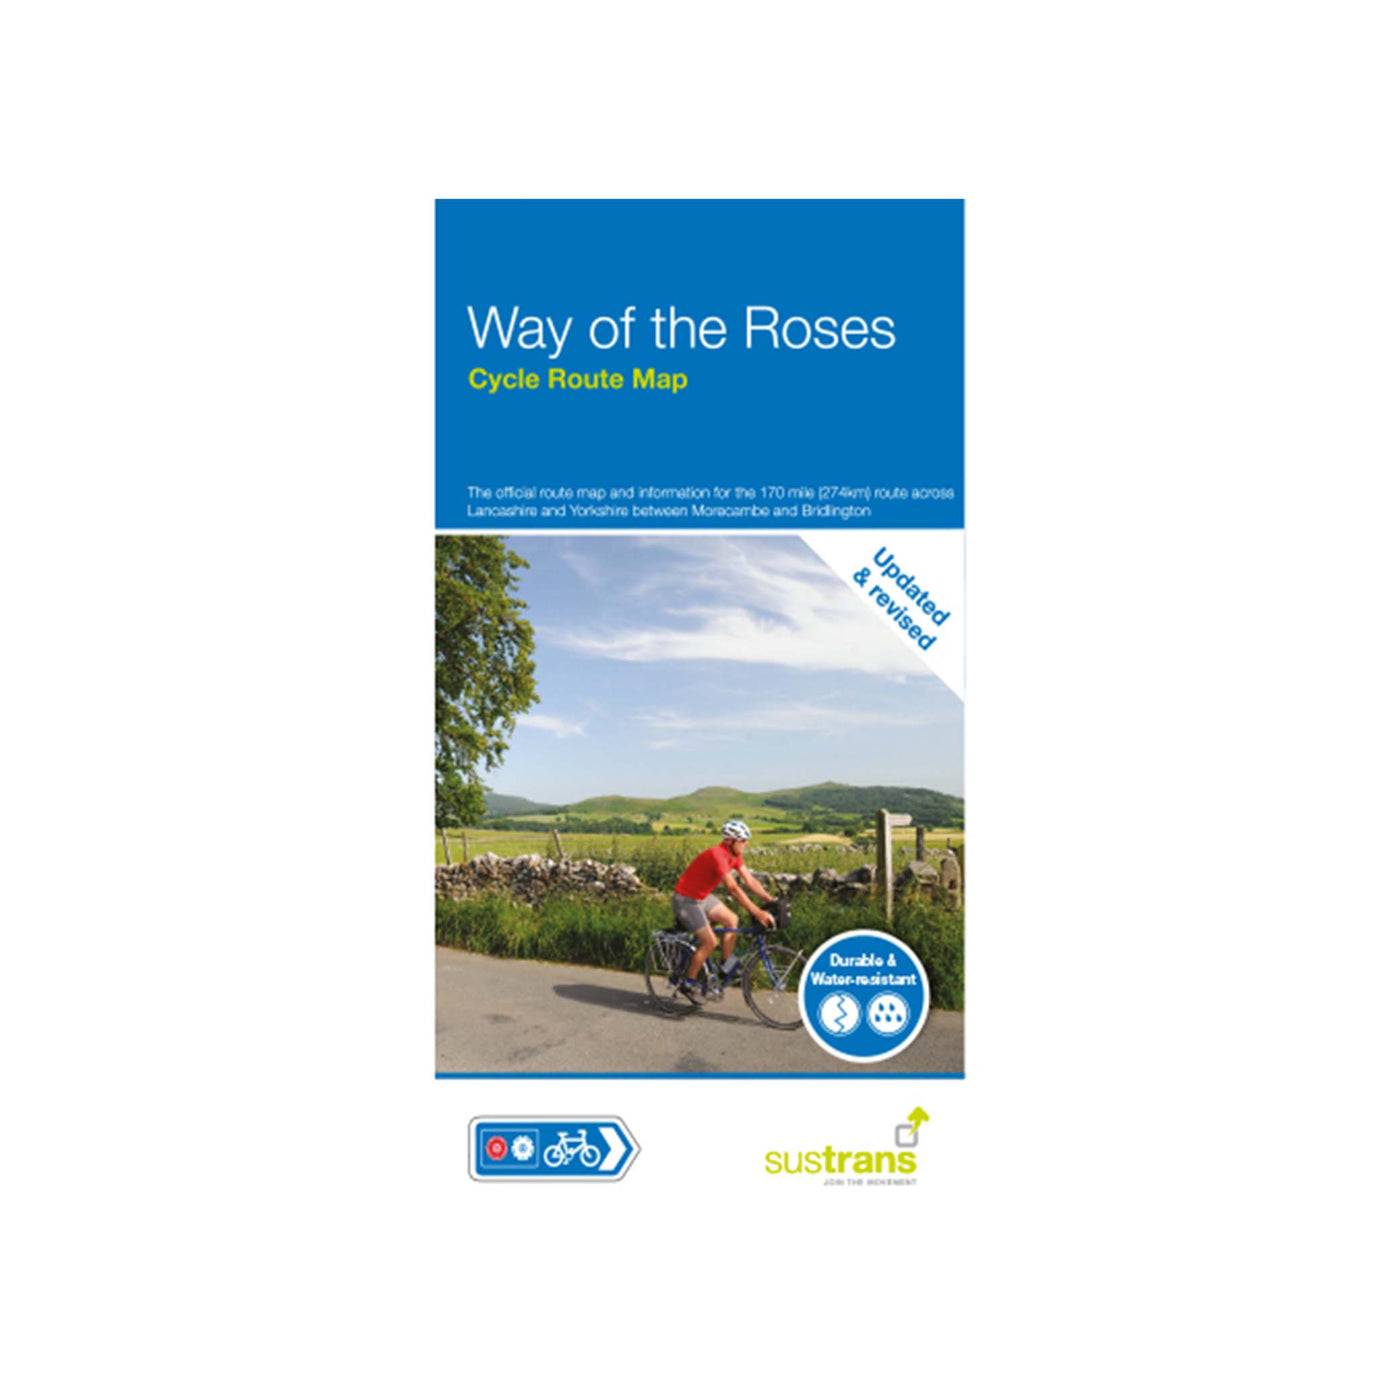 Way of the Roses cycle route map - updated 2021 and printed on water resistant paper. 